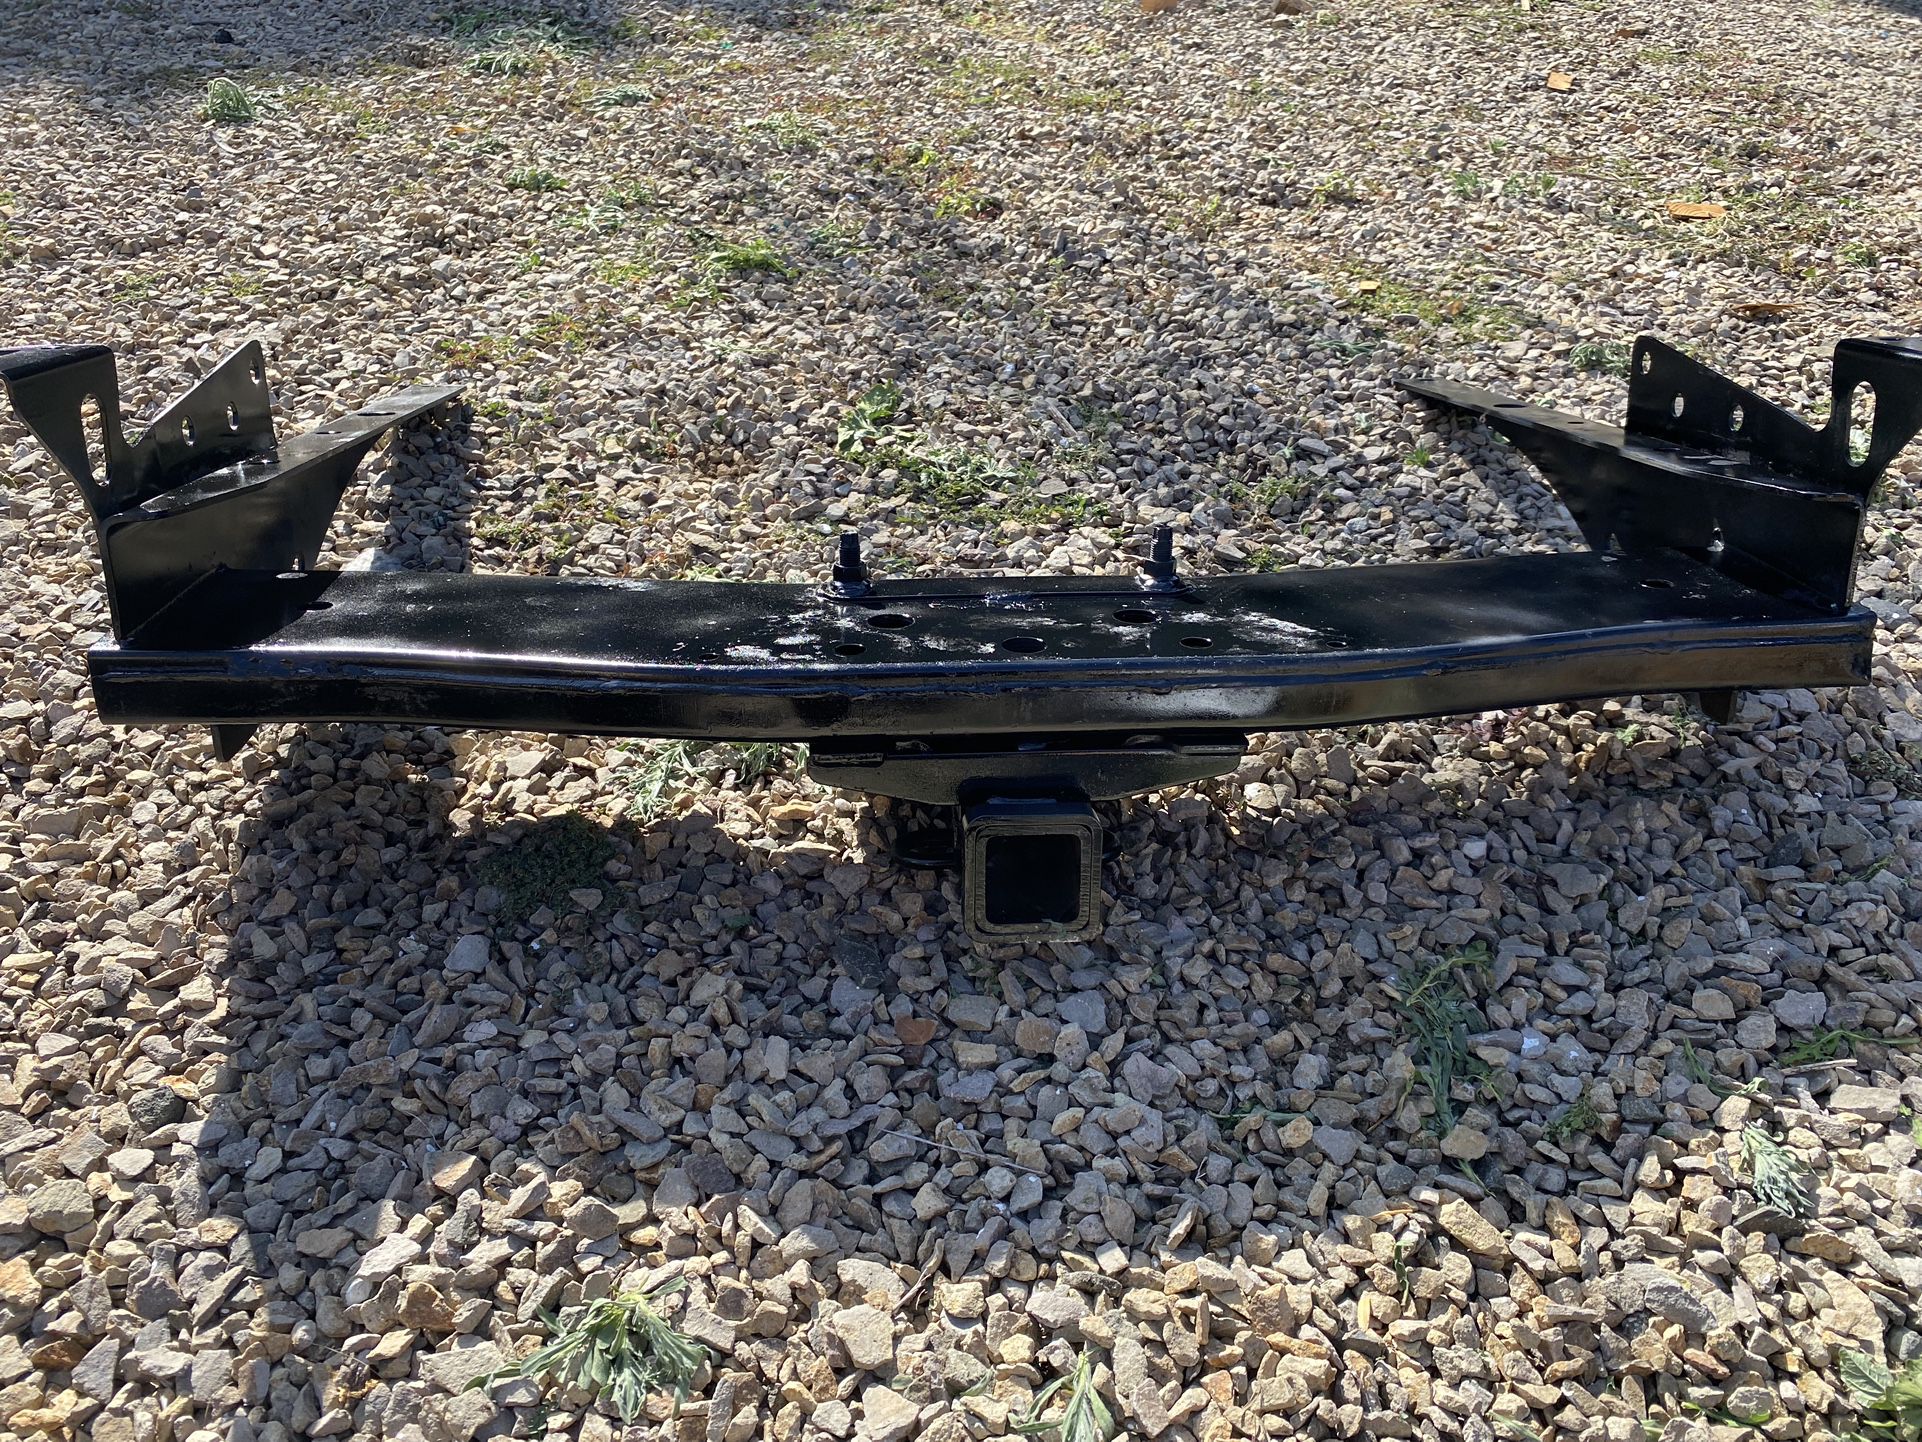 2000 - 2006 Toyota Tundra And Sequoia Tow Hitch Perfect Condition 